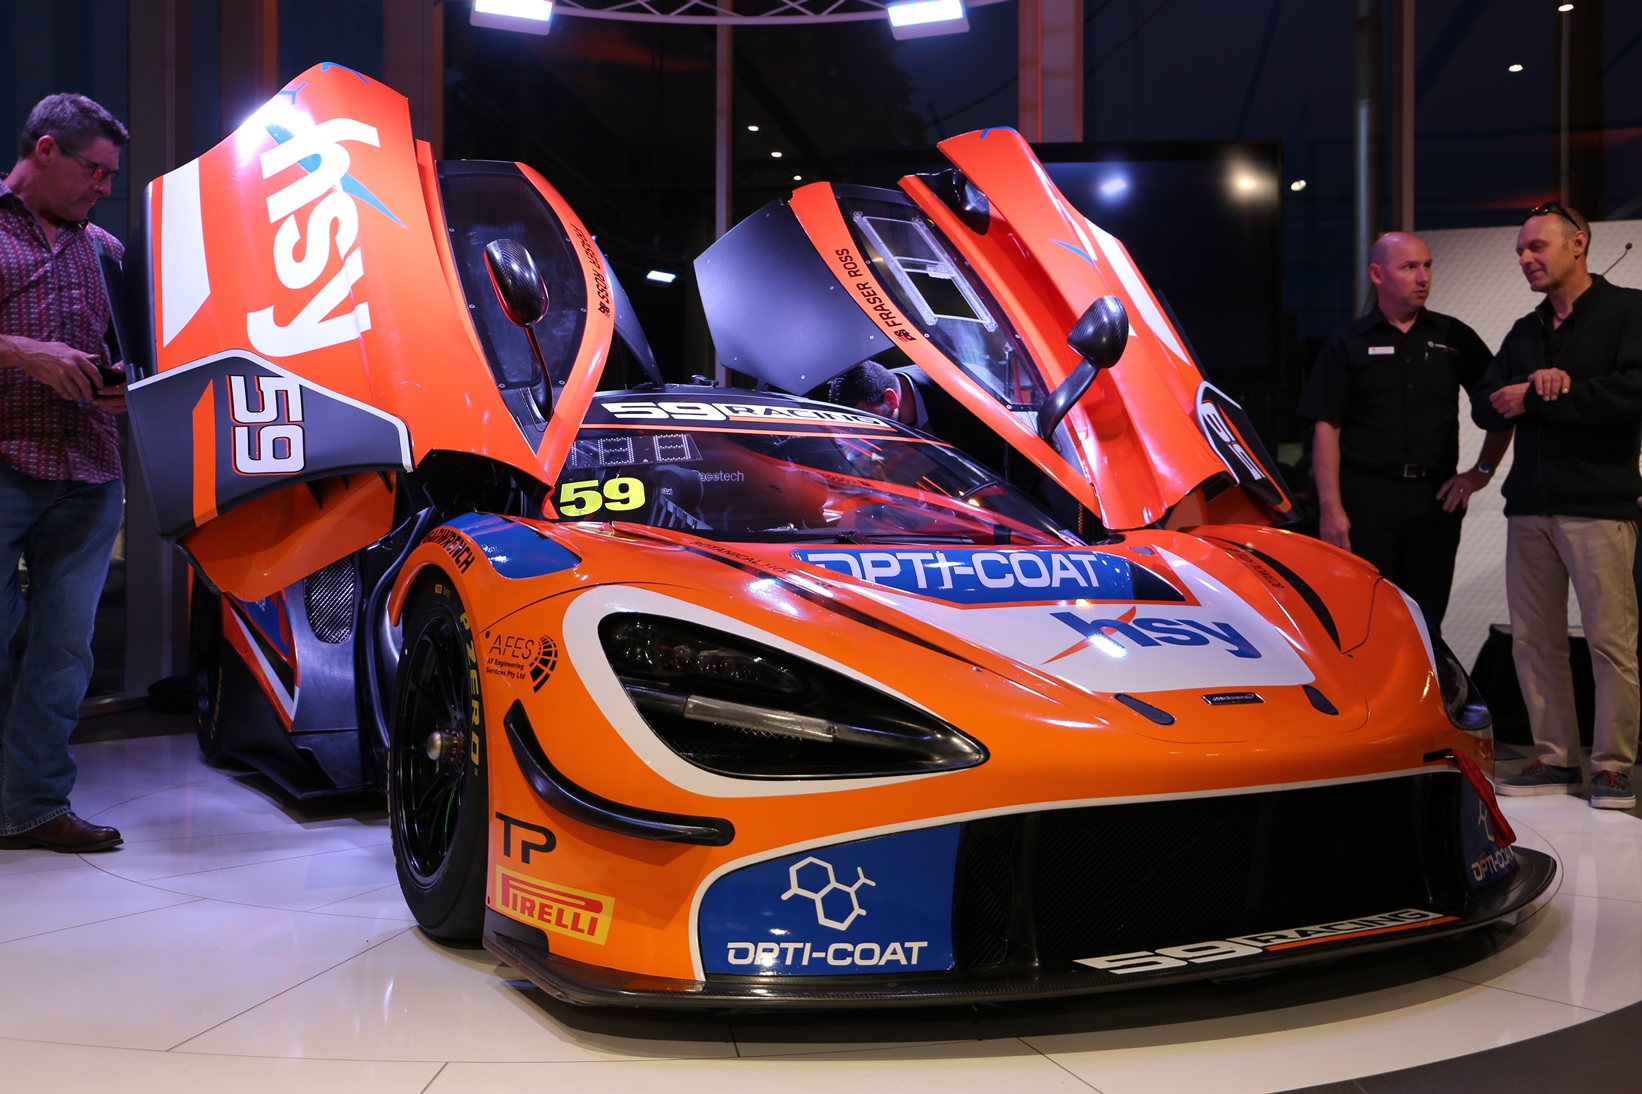 hsy Racing Launches 2019 Season With McLaren